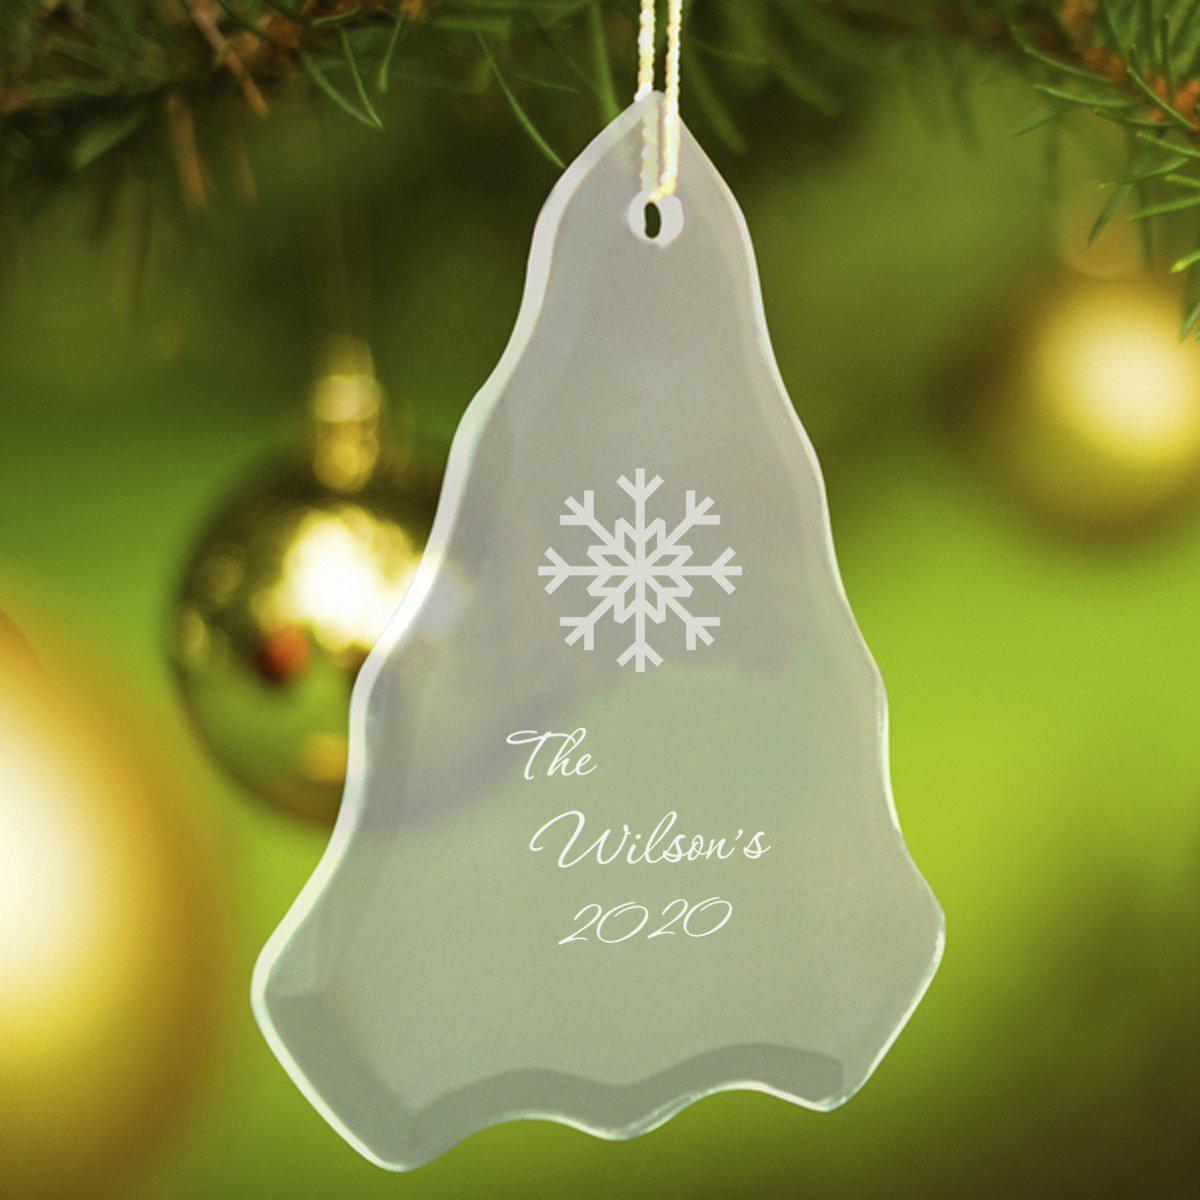 Personalized Tree Shaped Glass Ornaments - Christmas Ornaments